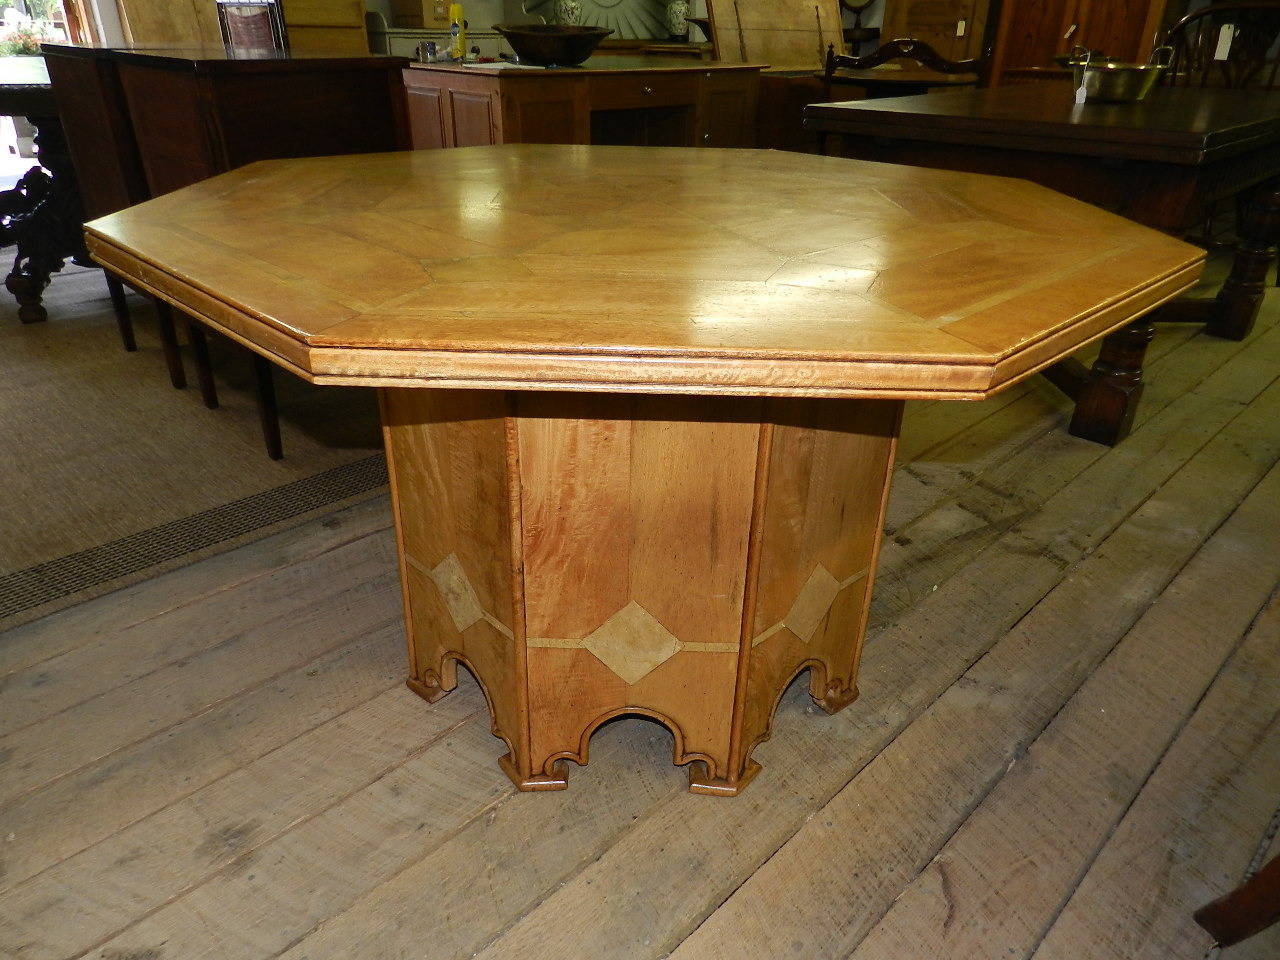 Octagonal mahogany dining or center table with inlaid marble top and pedestal by Barker and Stonehouse, England